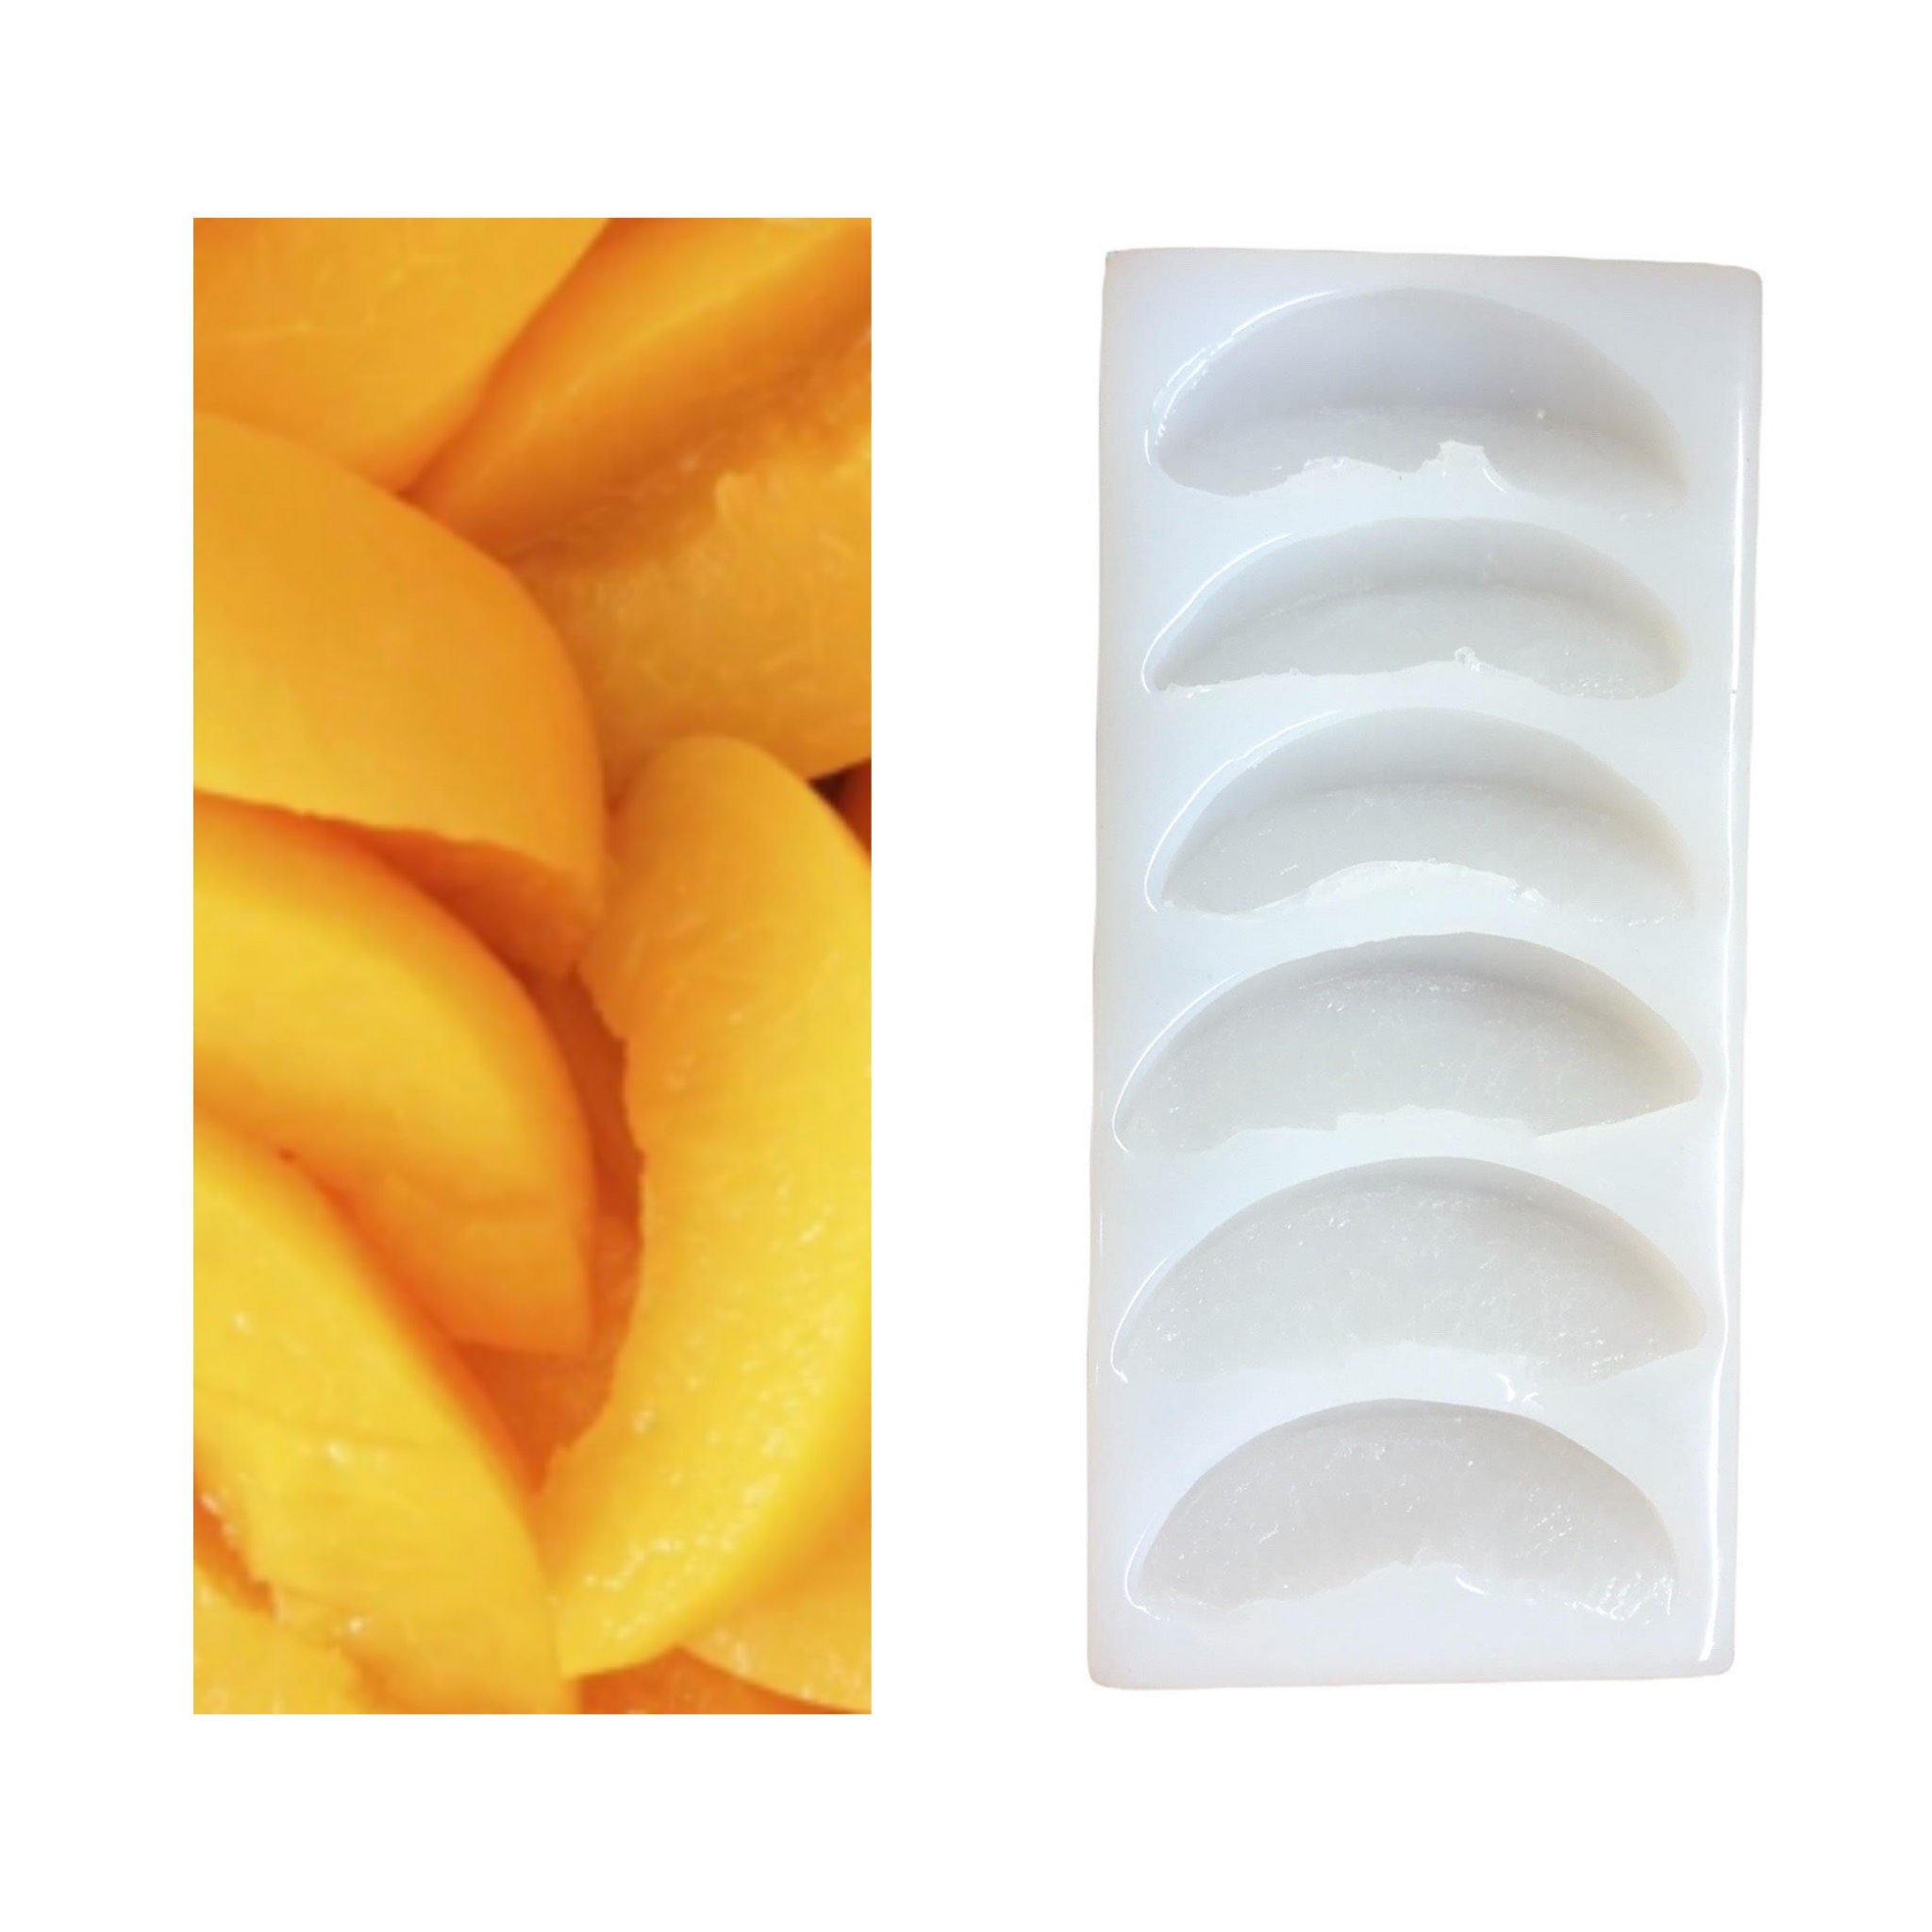 16Pc Fruit Rings cereal type Realistic Silicone Mold. For Wax, Embed, Soap, Resin Castings, Not Food Grade